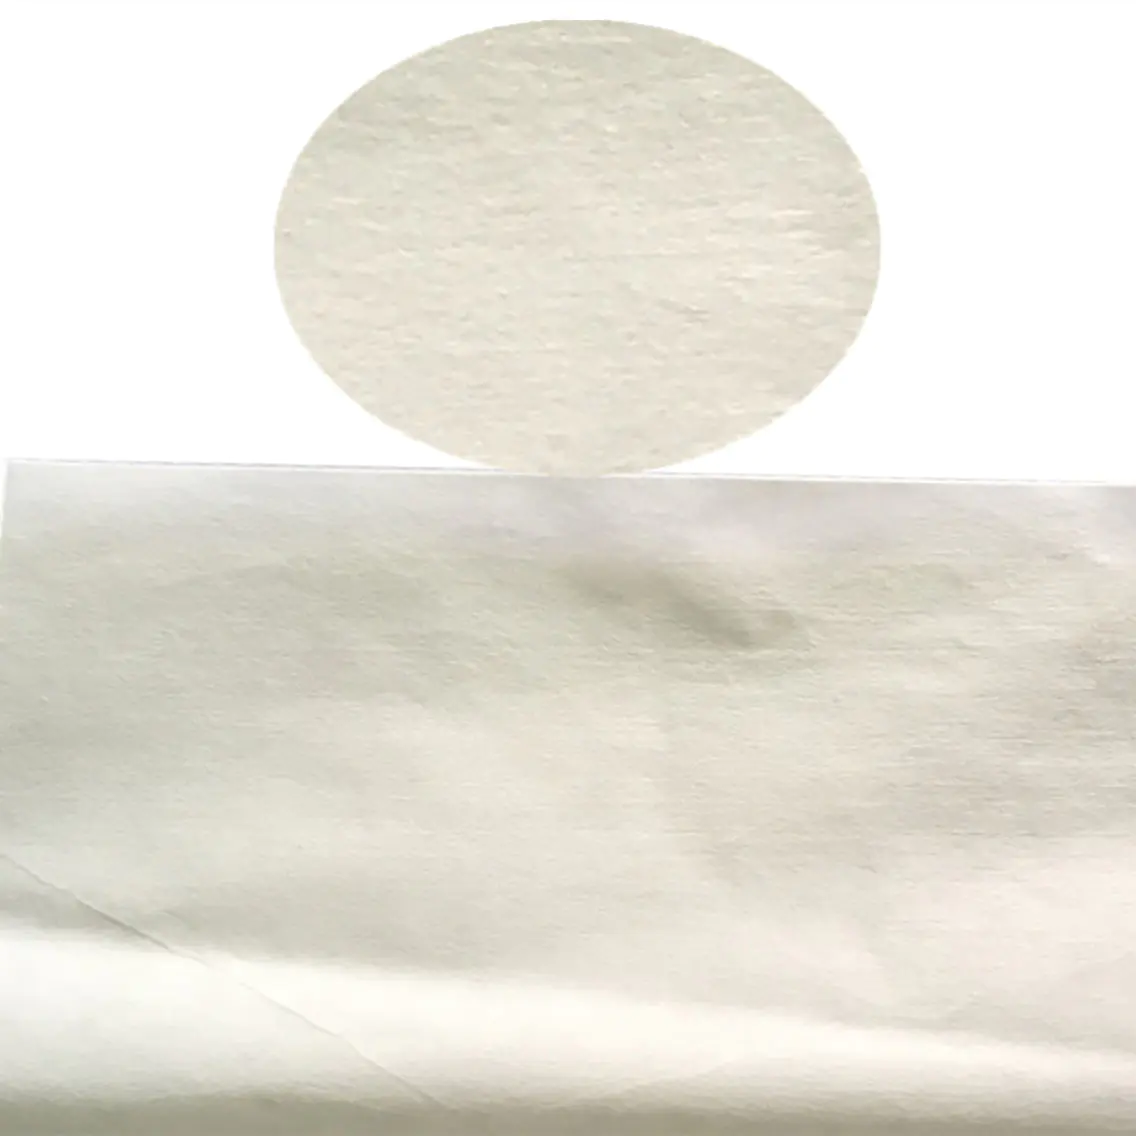 Cleanmo convenient non woven wipes wholesale for stainless steel surface